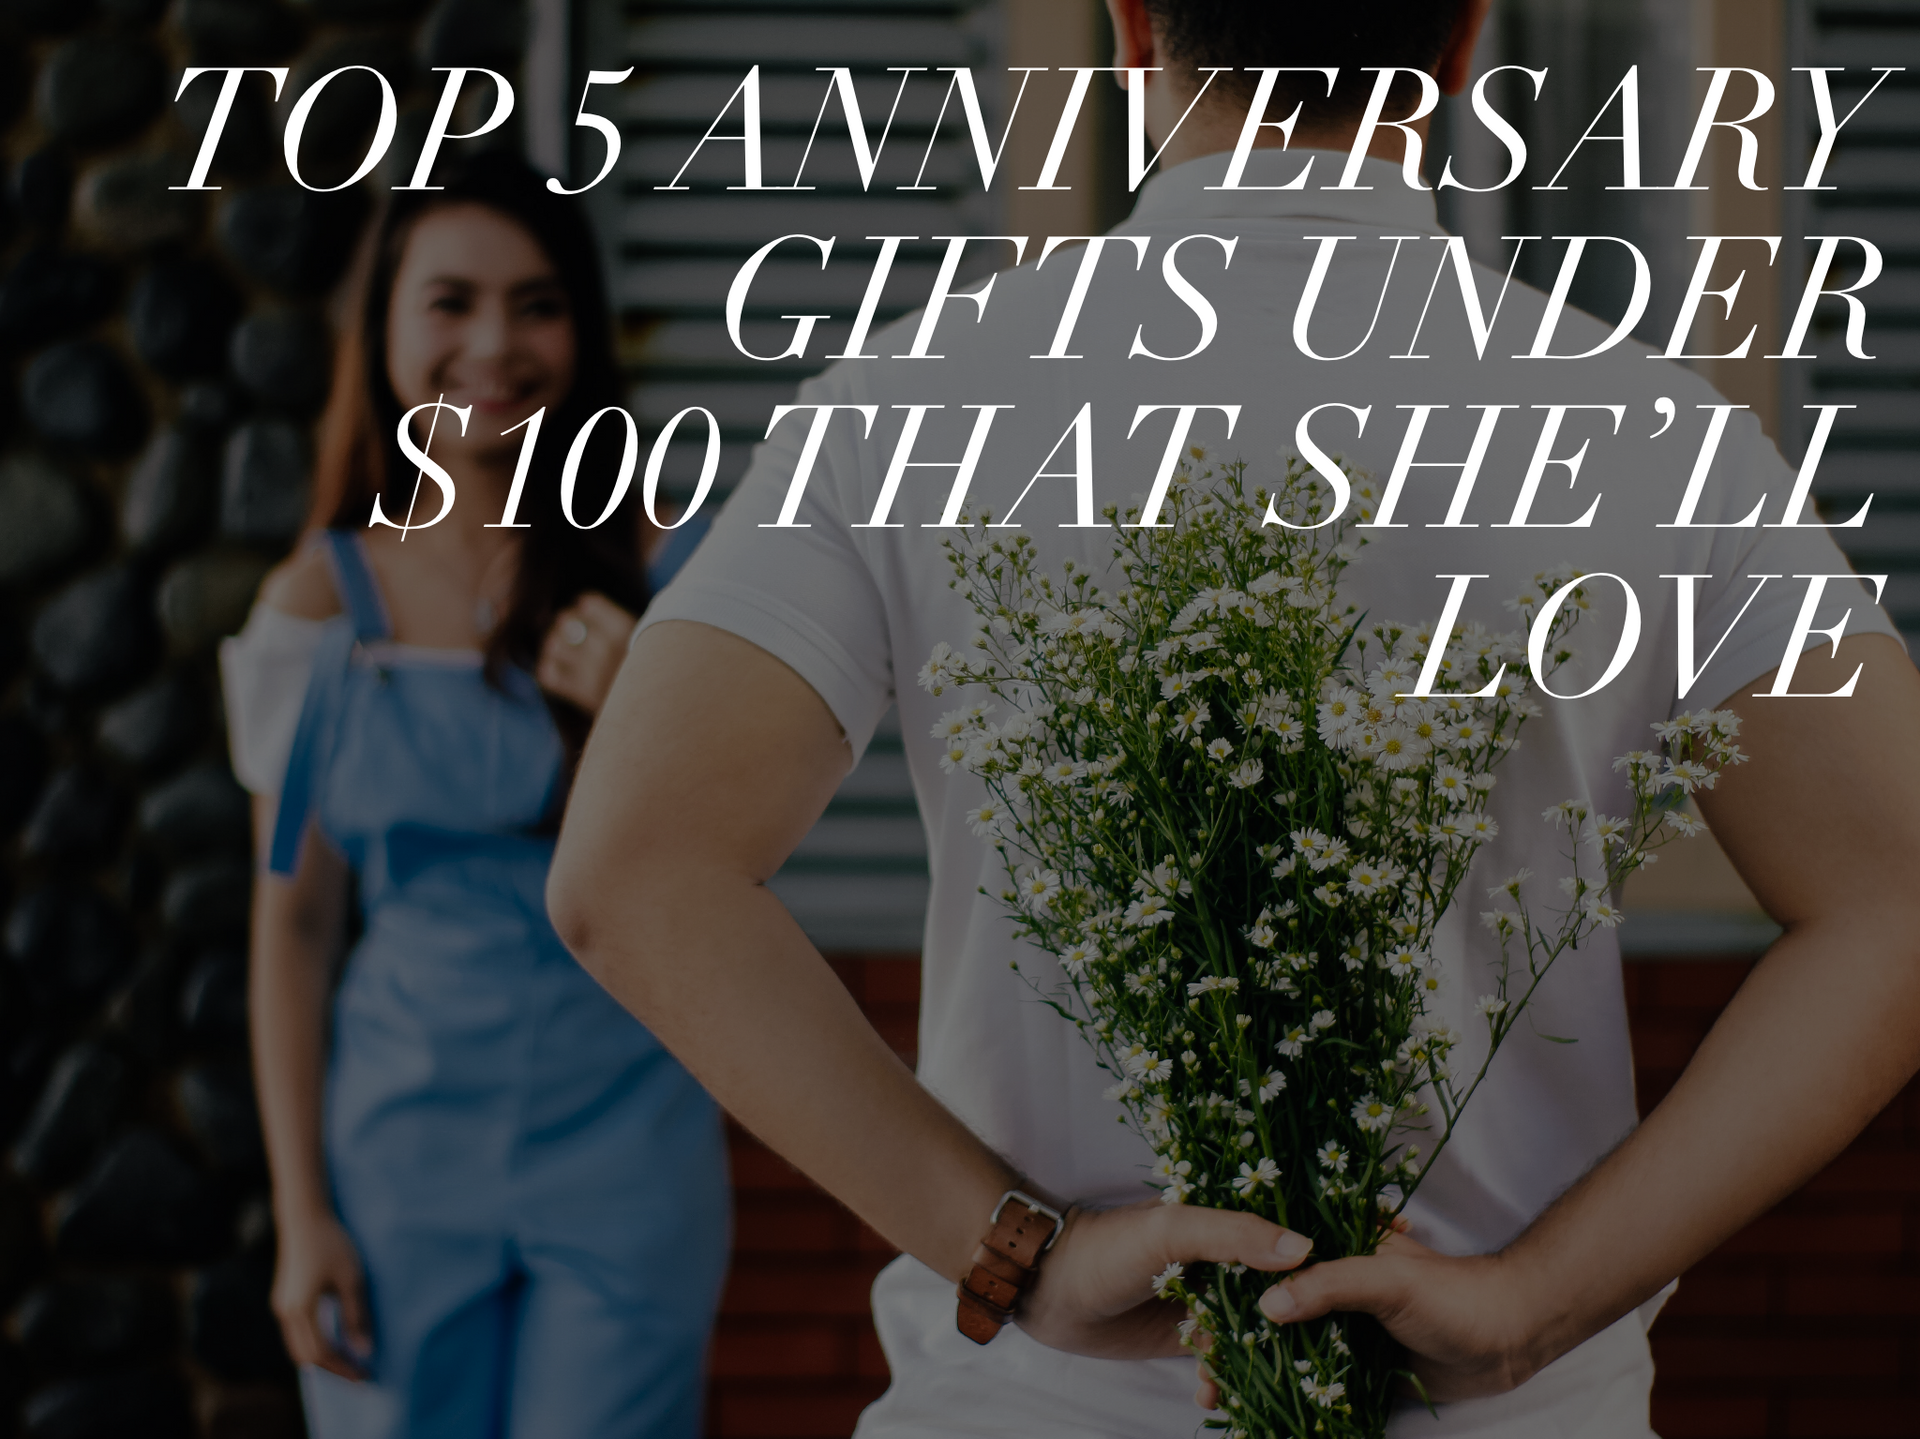 Top 5 Anniversary Gifts Under $100 That She’ll Love